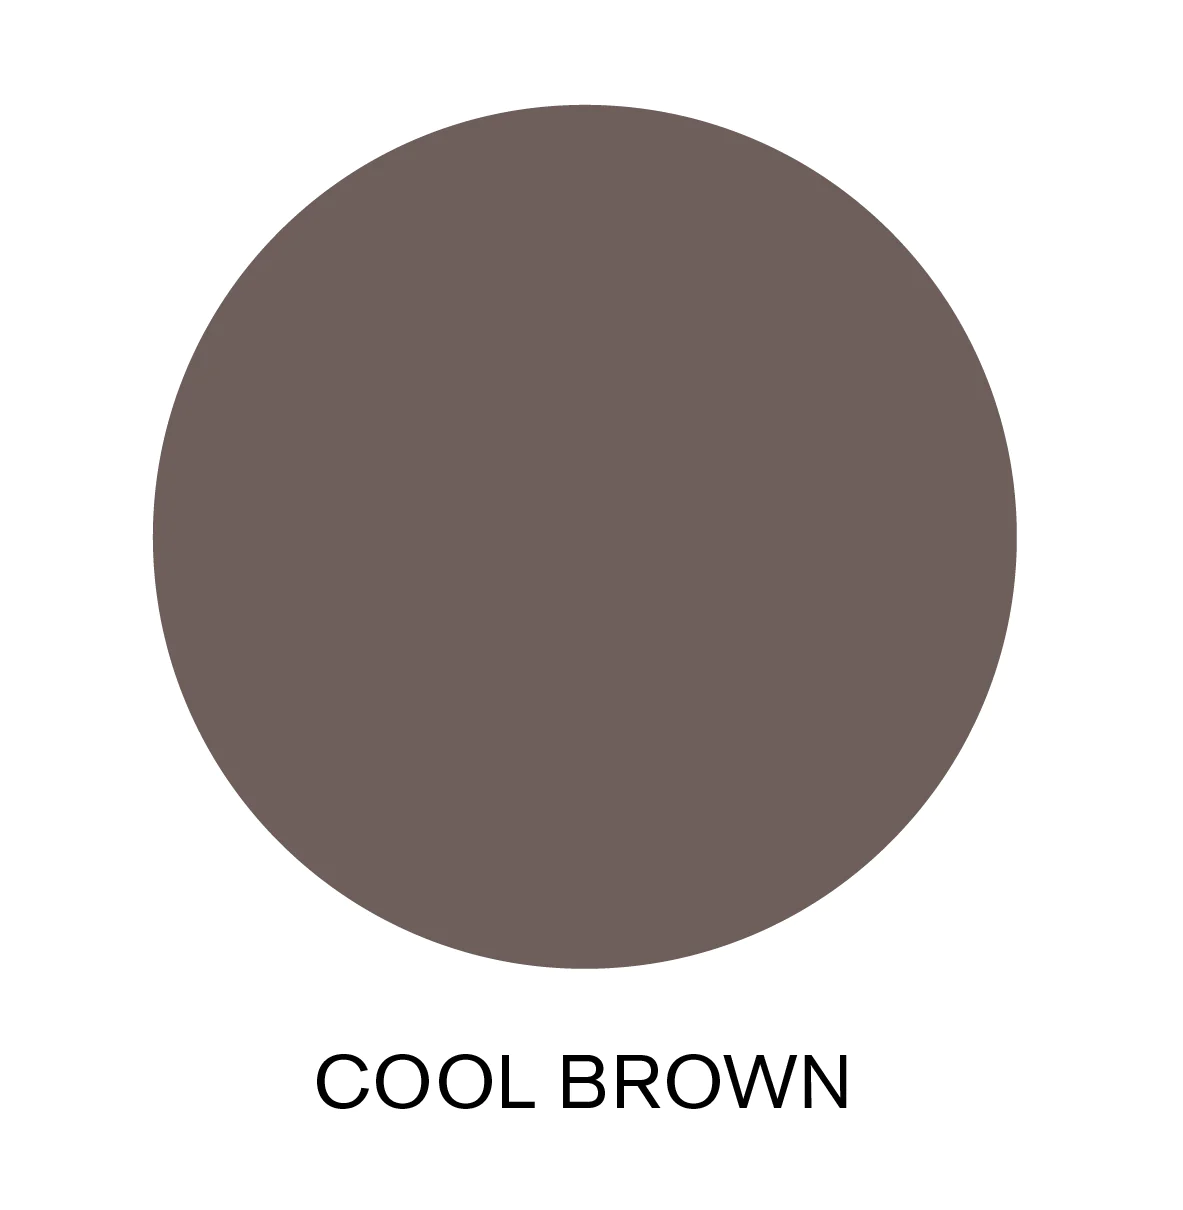 hdbp_swatches_ppt_cool_brown_1800x1800.jpg